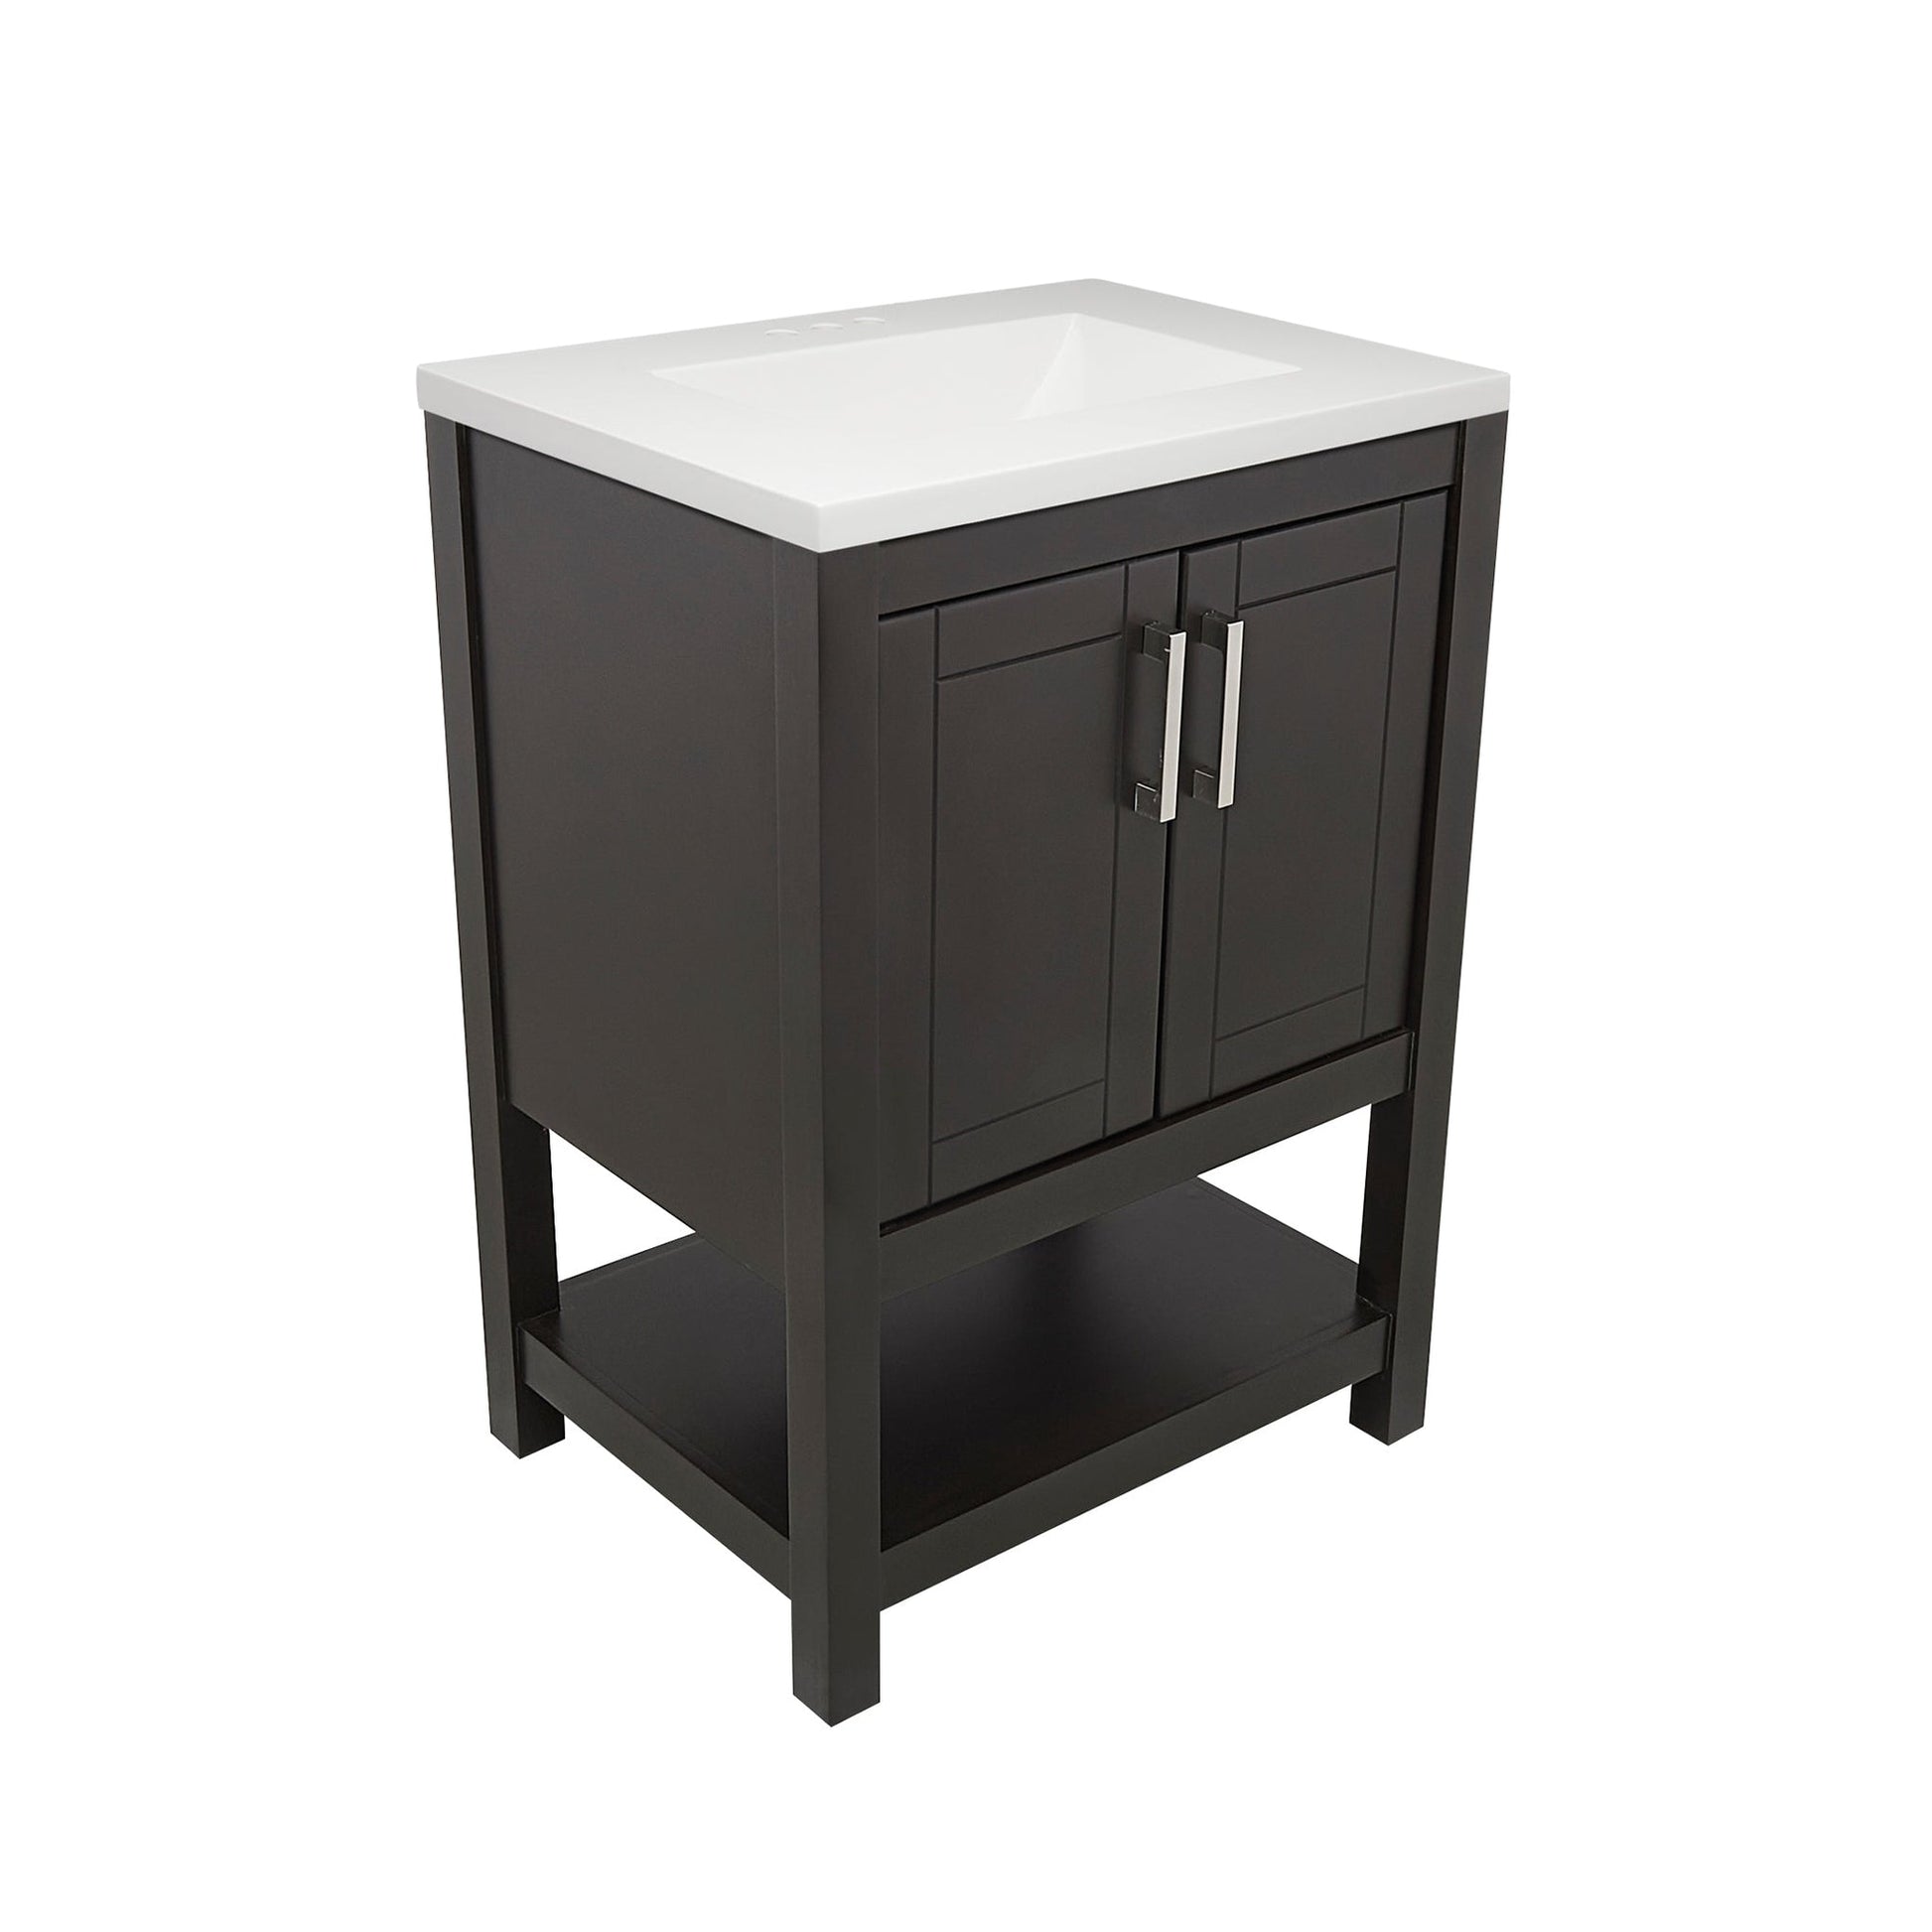 Ella's Bubbles Taos 25" Espresso Bathroom Vanity With White Cultured Marble Top and Sink